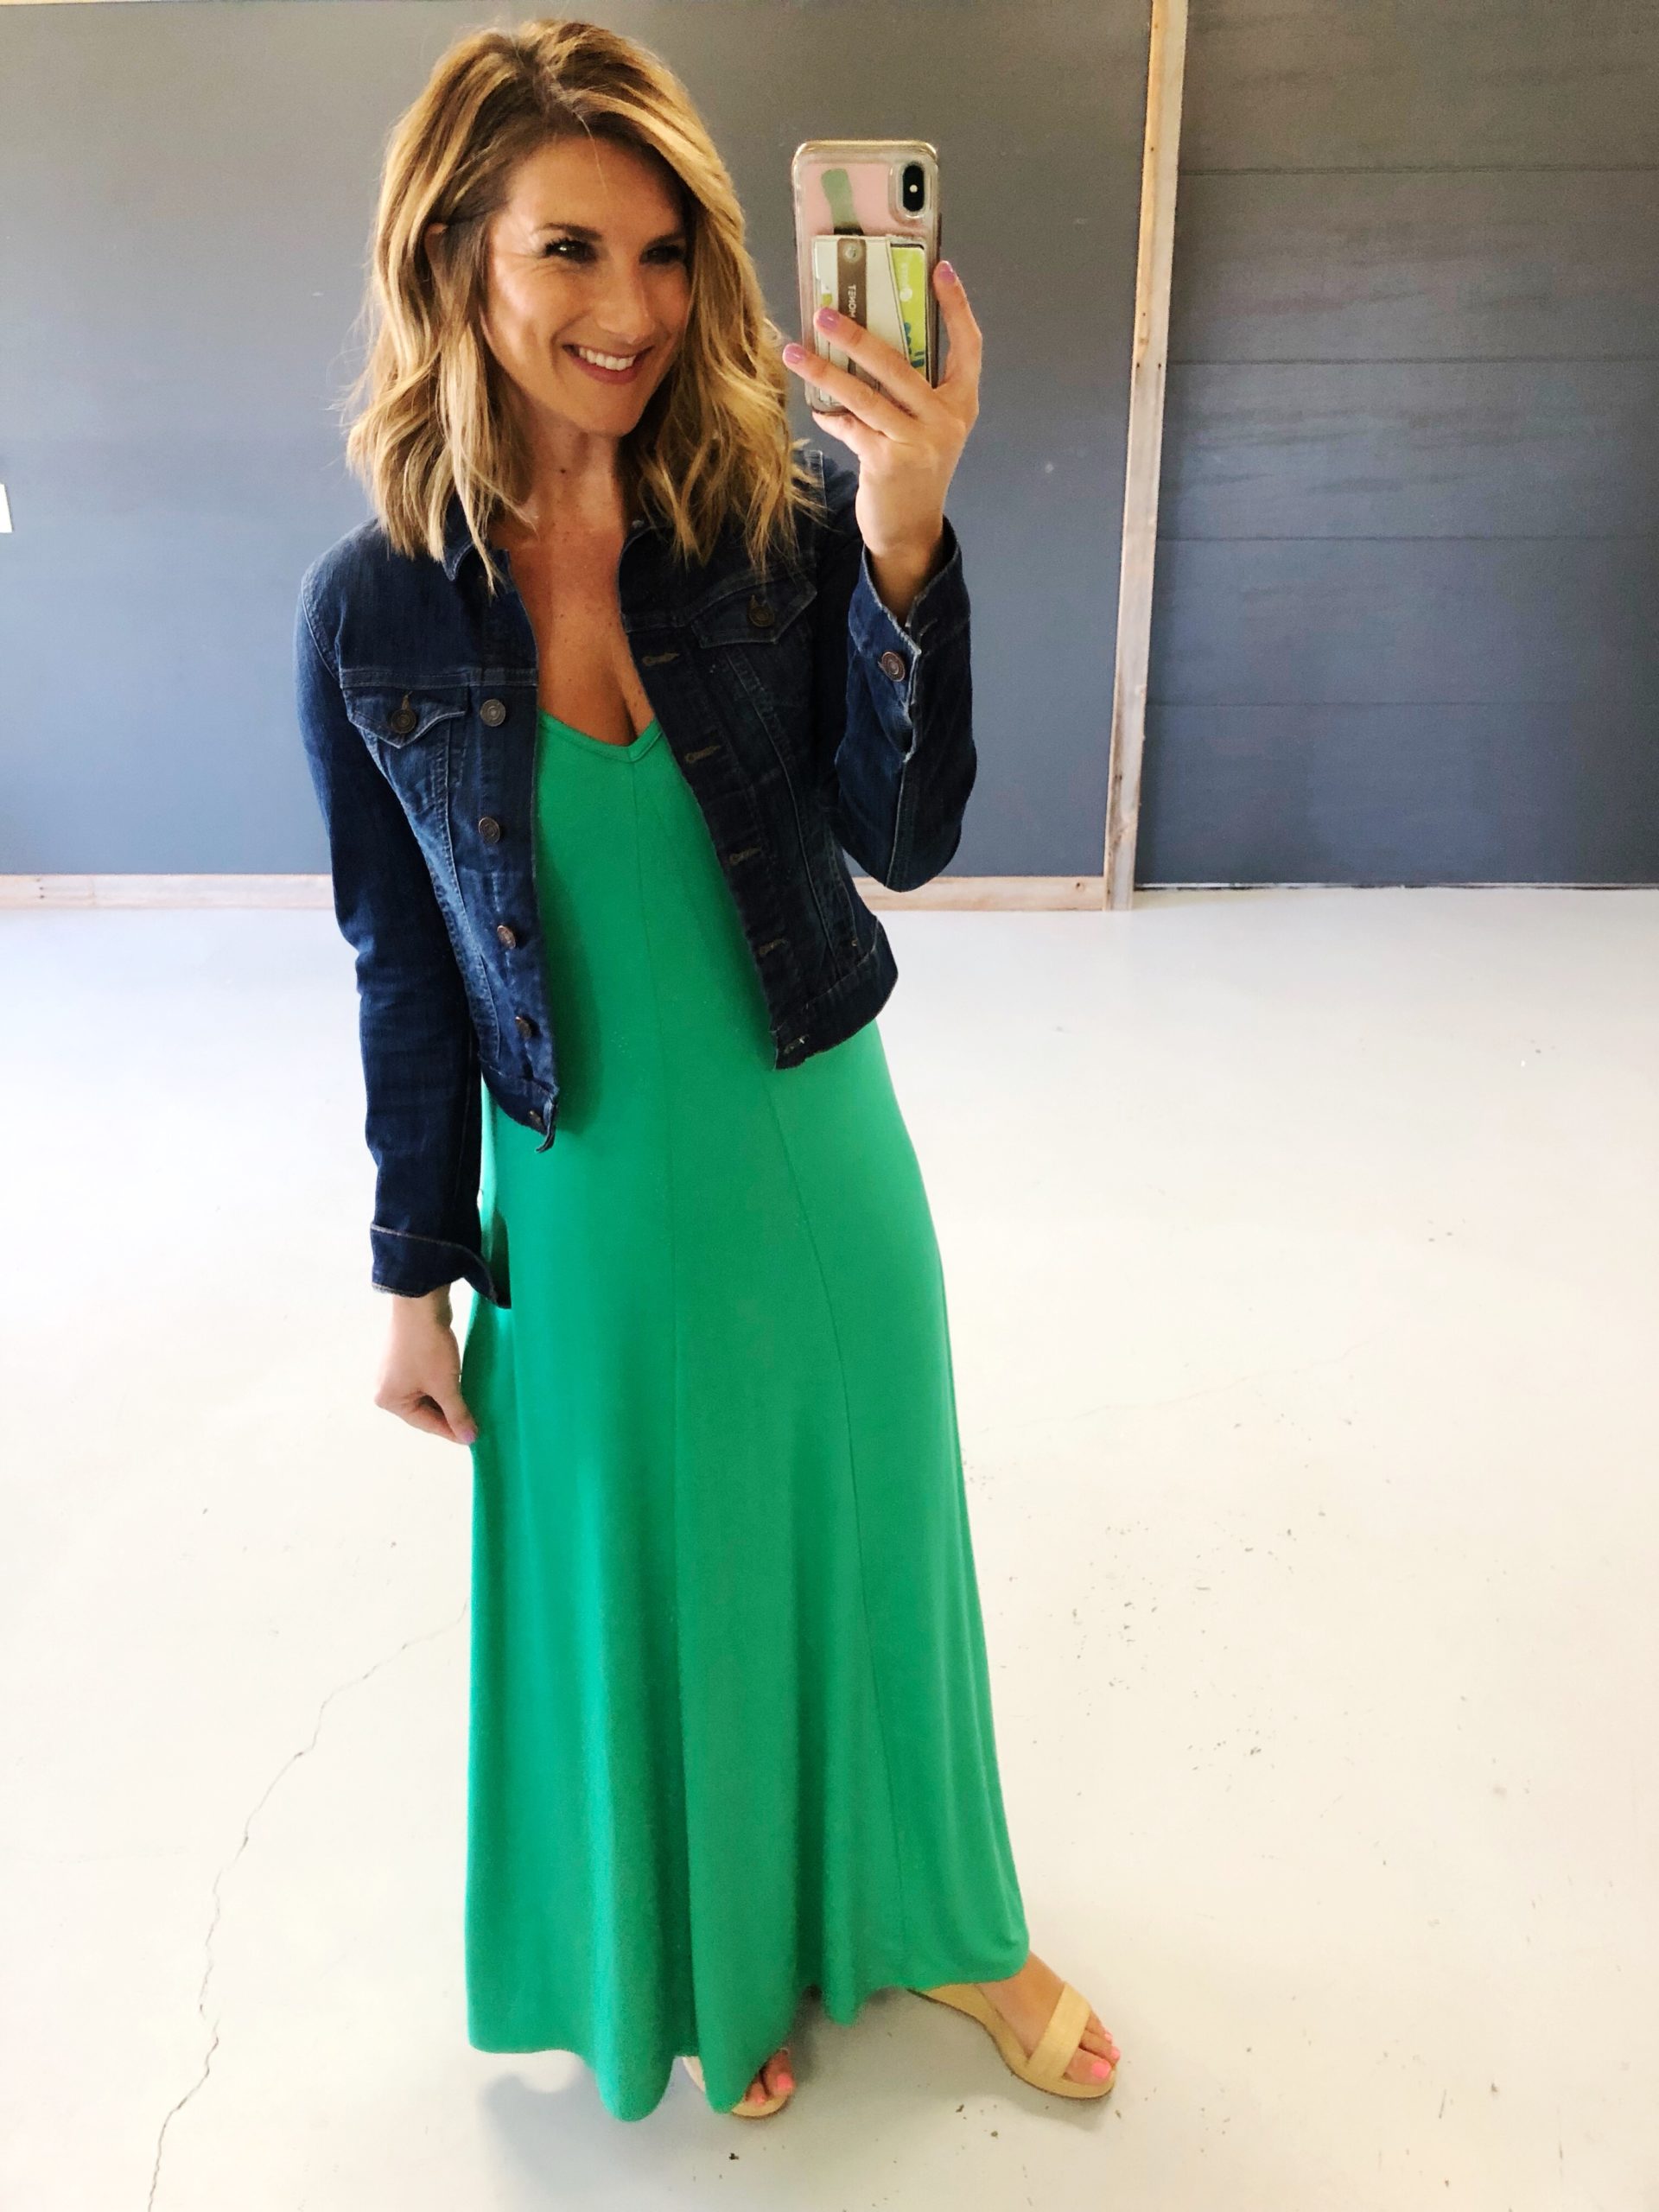 How to style a maxi dress for casual office day // how to style a maxi dress for work // cute summer outfit // what to wear with a maxi dress